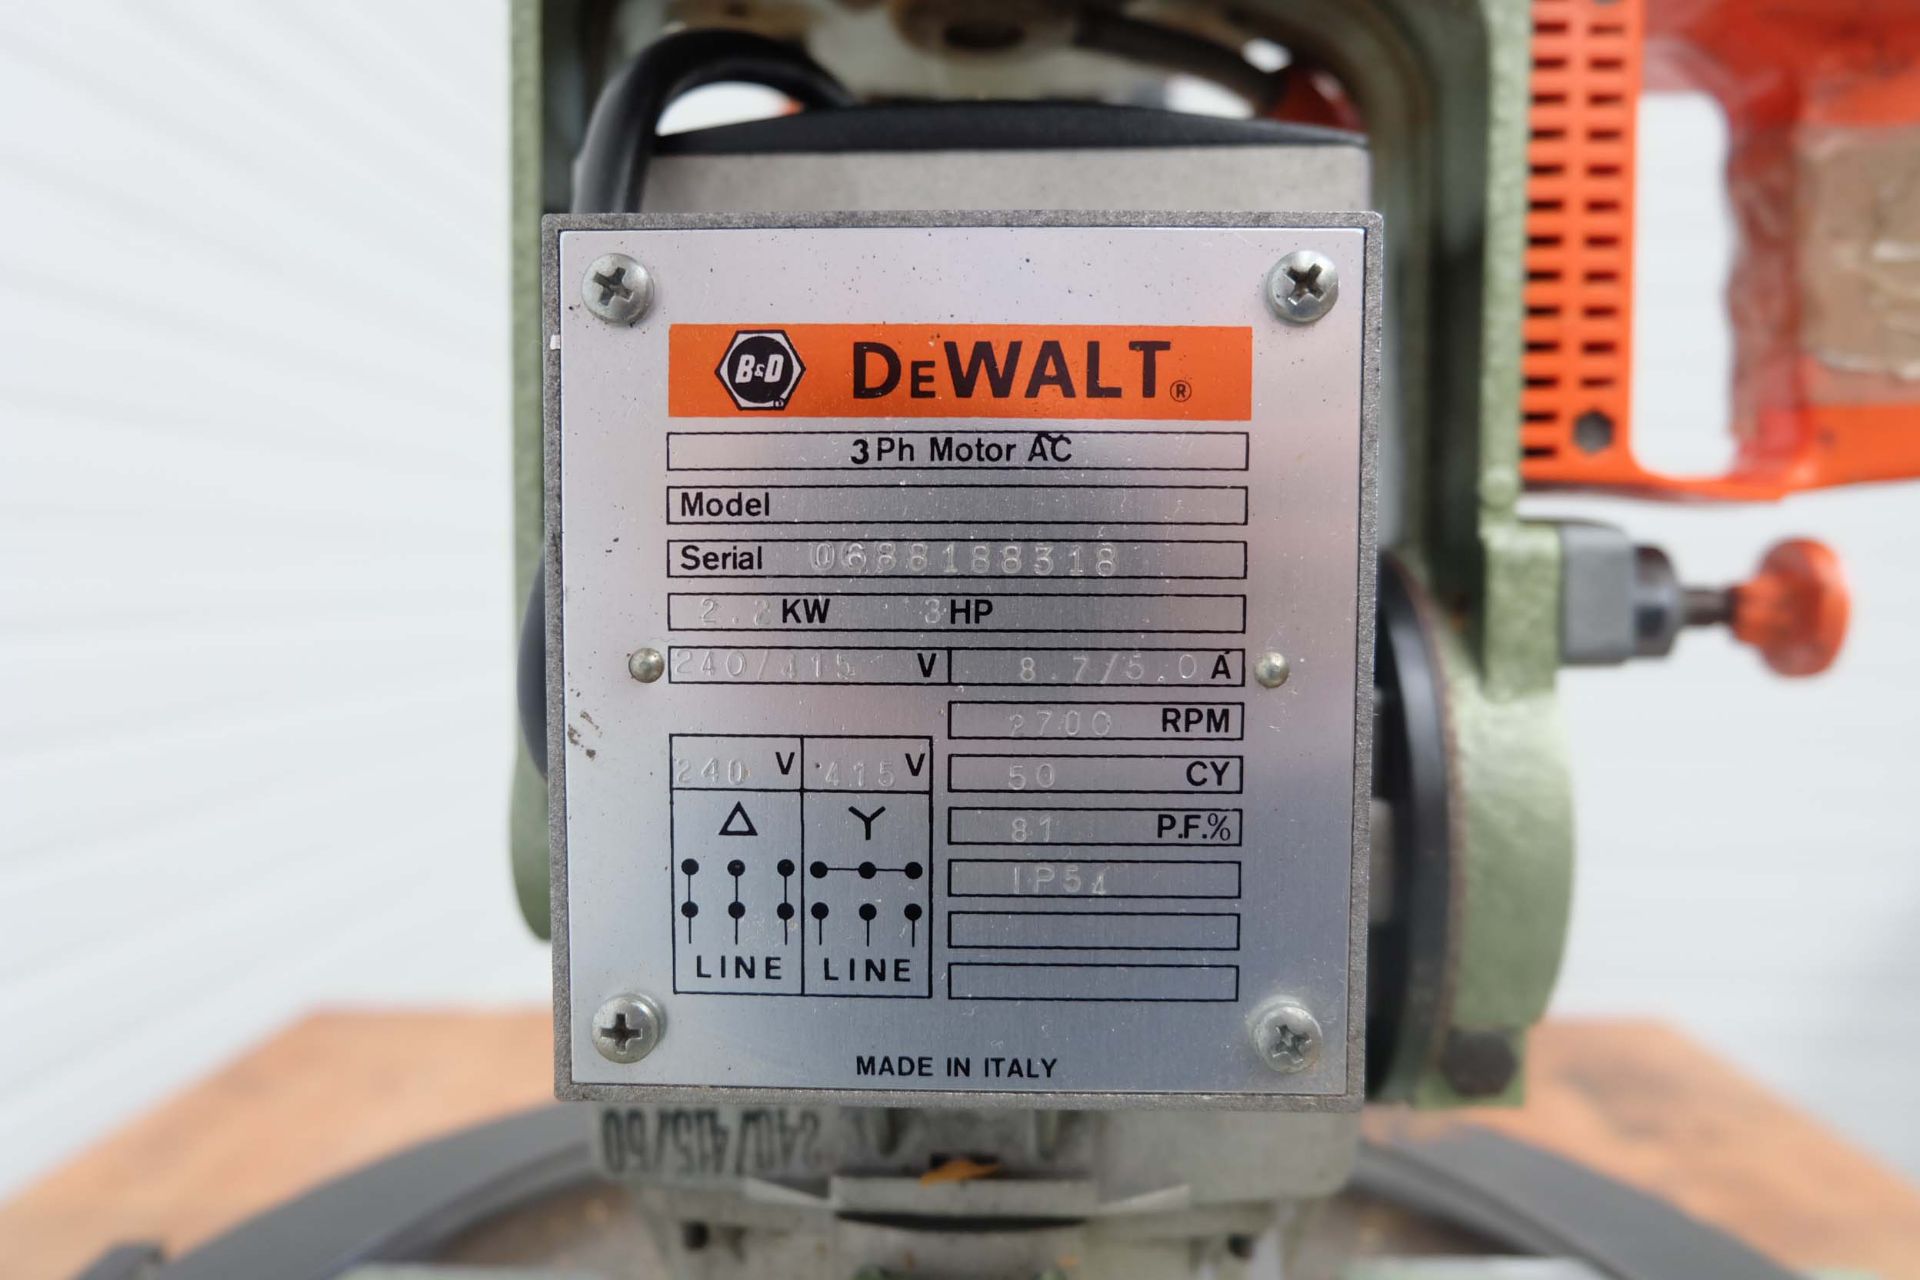 DeWalt Model DW8003 Radial Arm Saw. Motor 3 Phase, 2.2kW, 3Hp. Made in Italy - Image 7 of 8